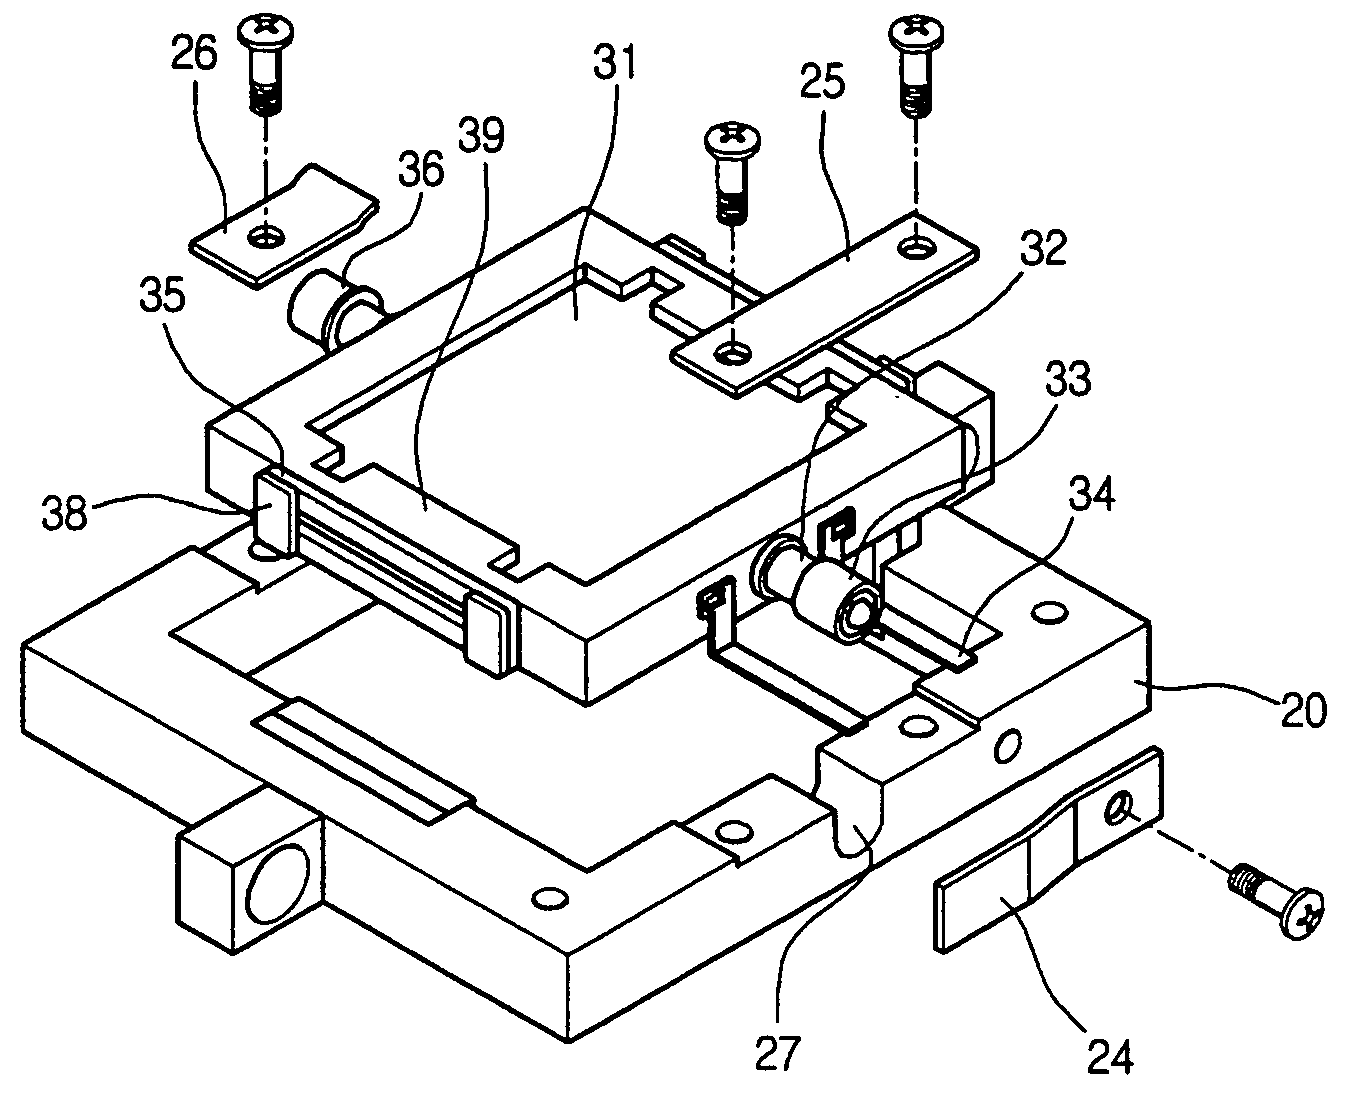 Actuator for improvement of resolution